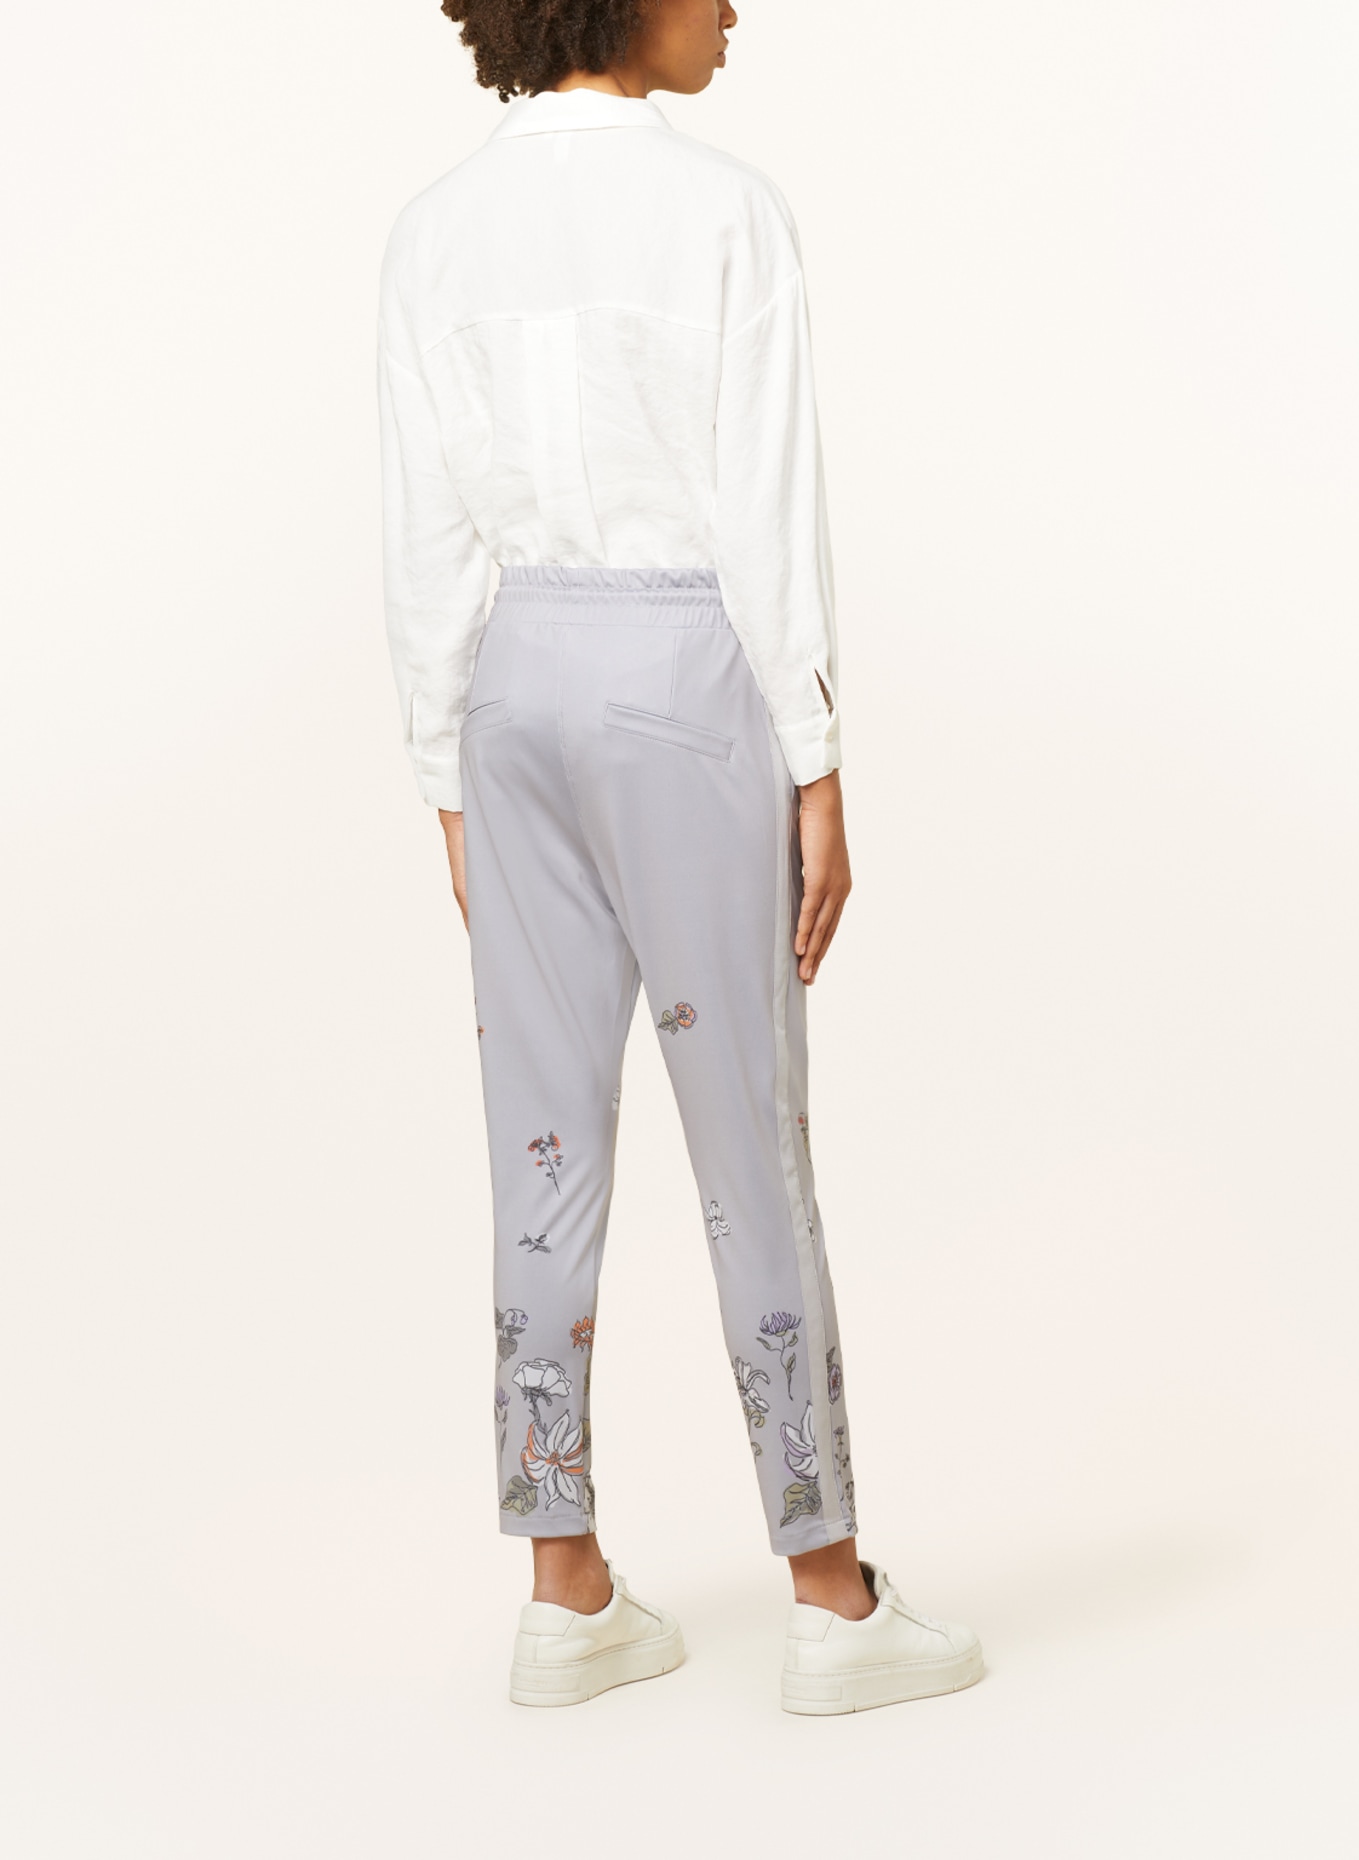 ELIAS RUMELIS Trousers ILENA in jogger style, Color: GRAY (Image 3)